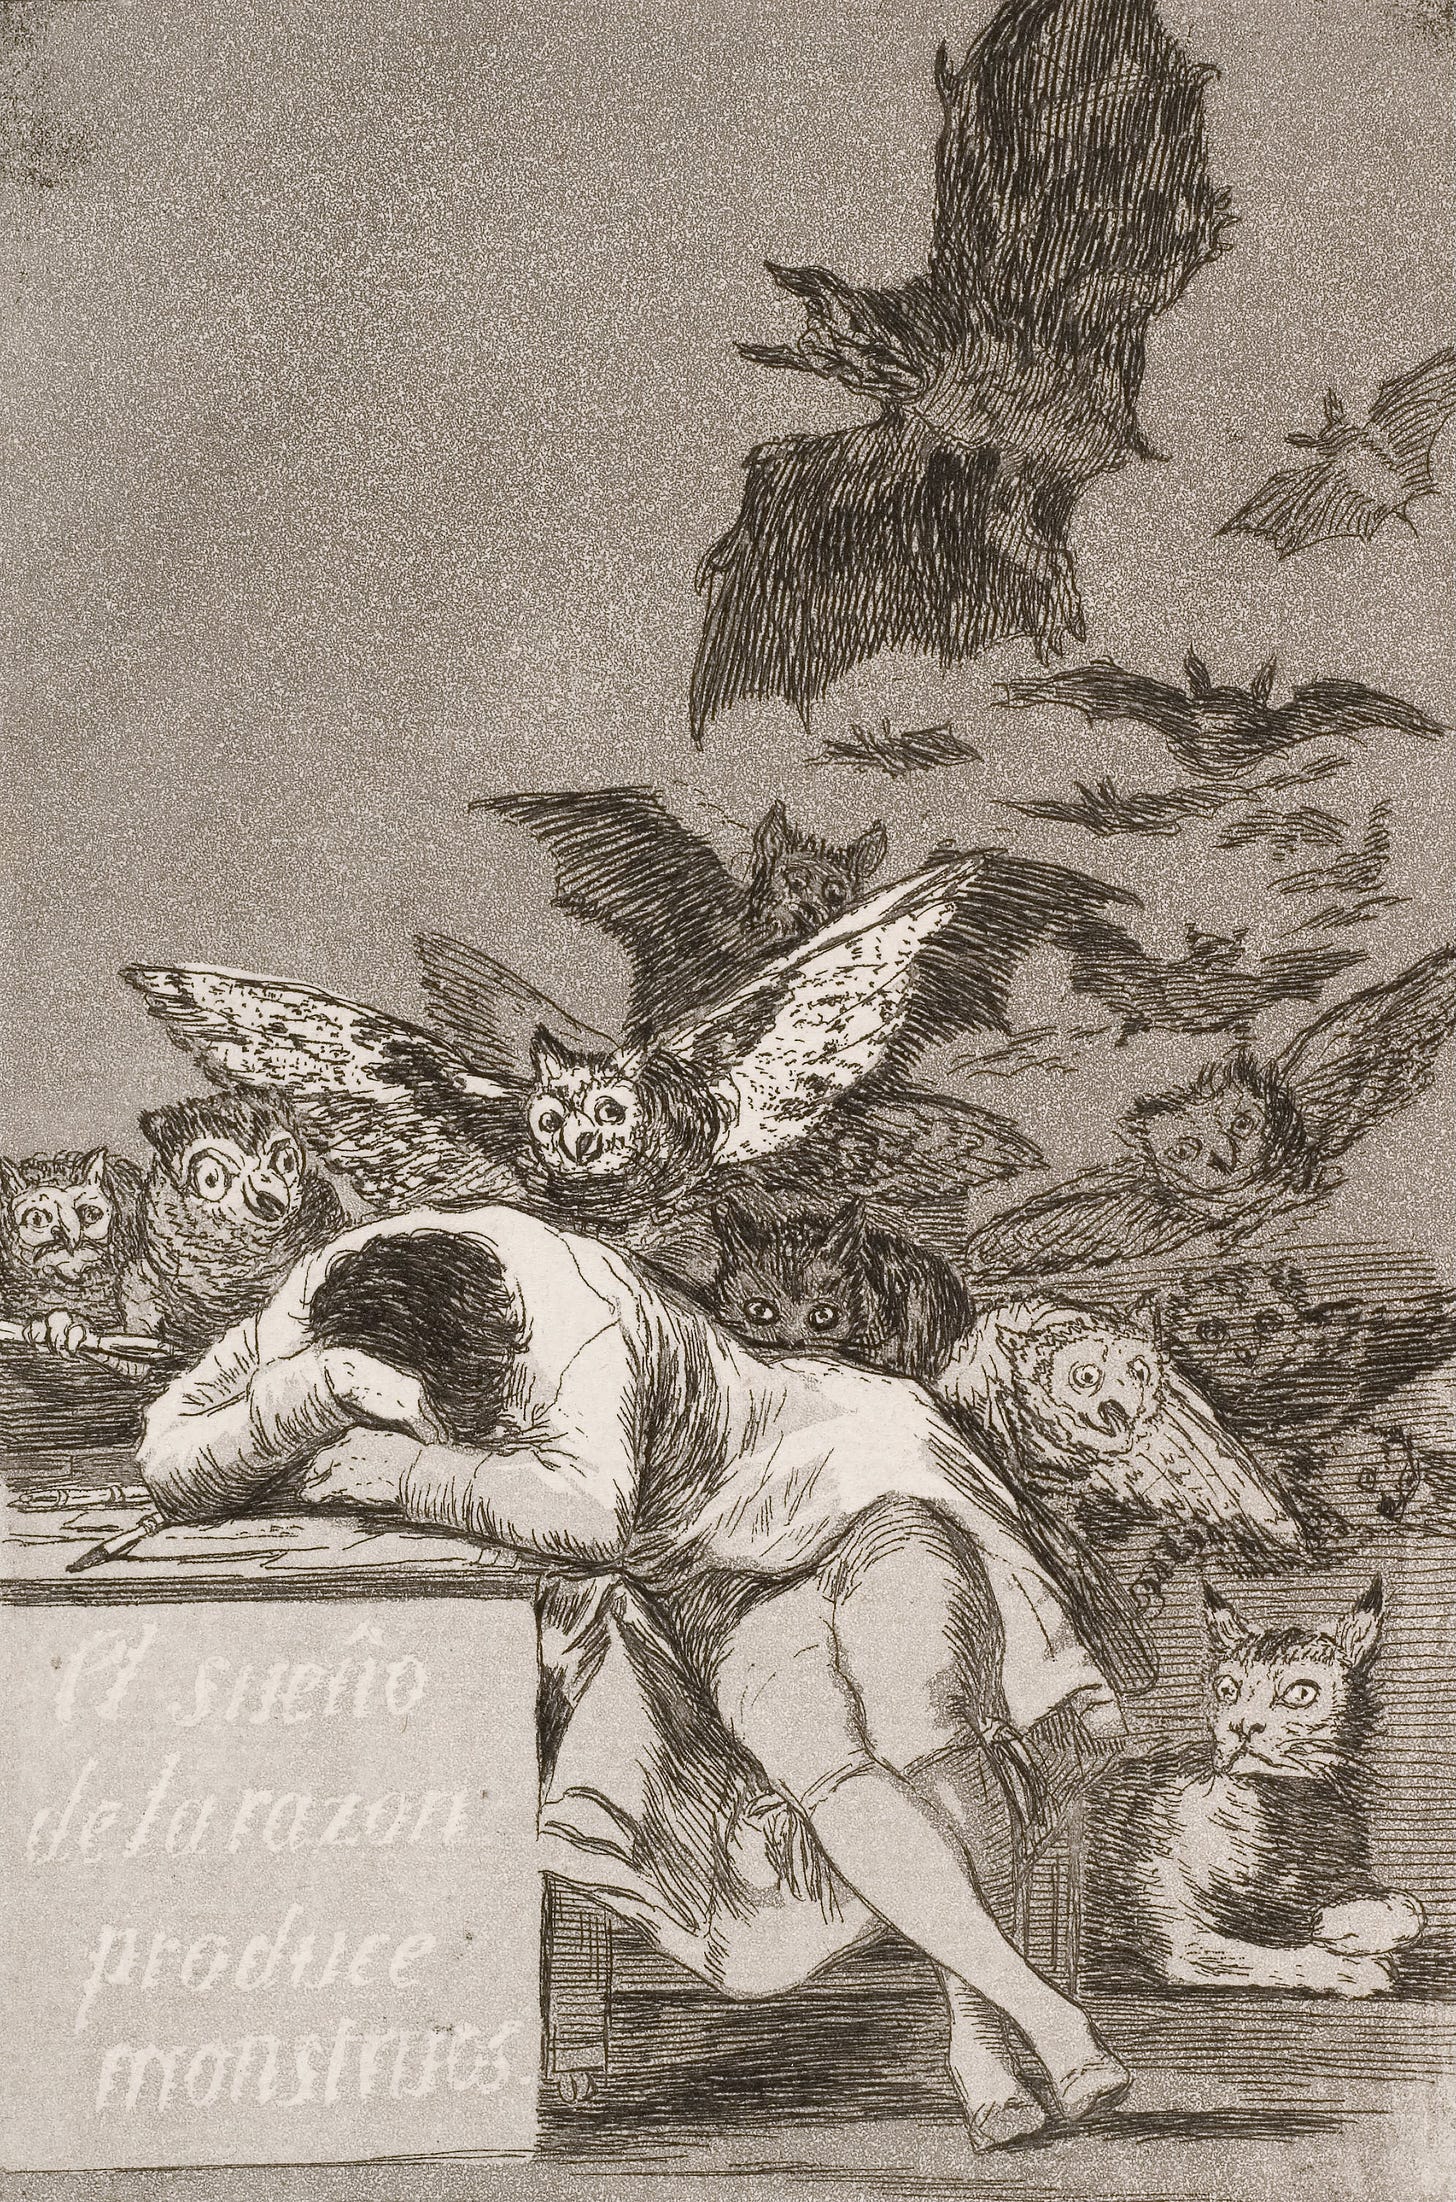 https://upload.wikimedia.org/wikipedia/commons/b/bc/Francisco_Jos%C3%A9_de_Goya_y_Lucientes_-_The_sleep_of_reason_produces_monsters_%28No._43%29%2C_from_Los_Caprichos_-_Google_Art_Project.jpg